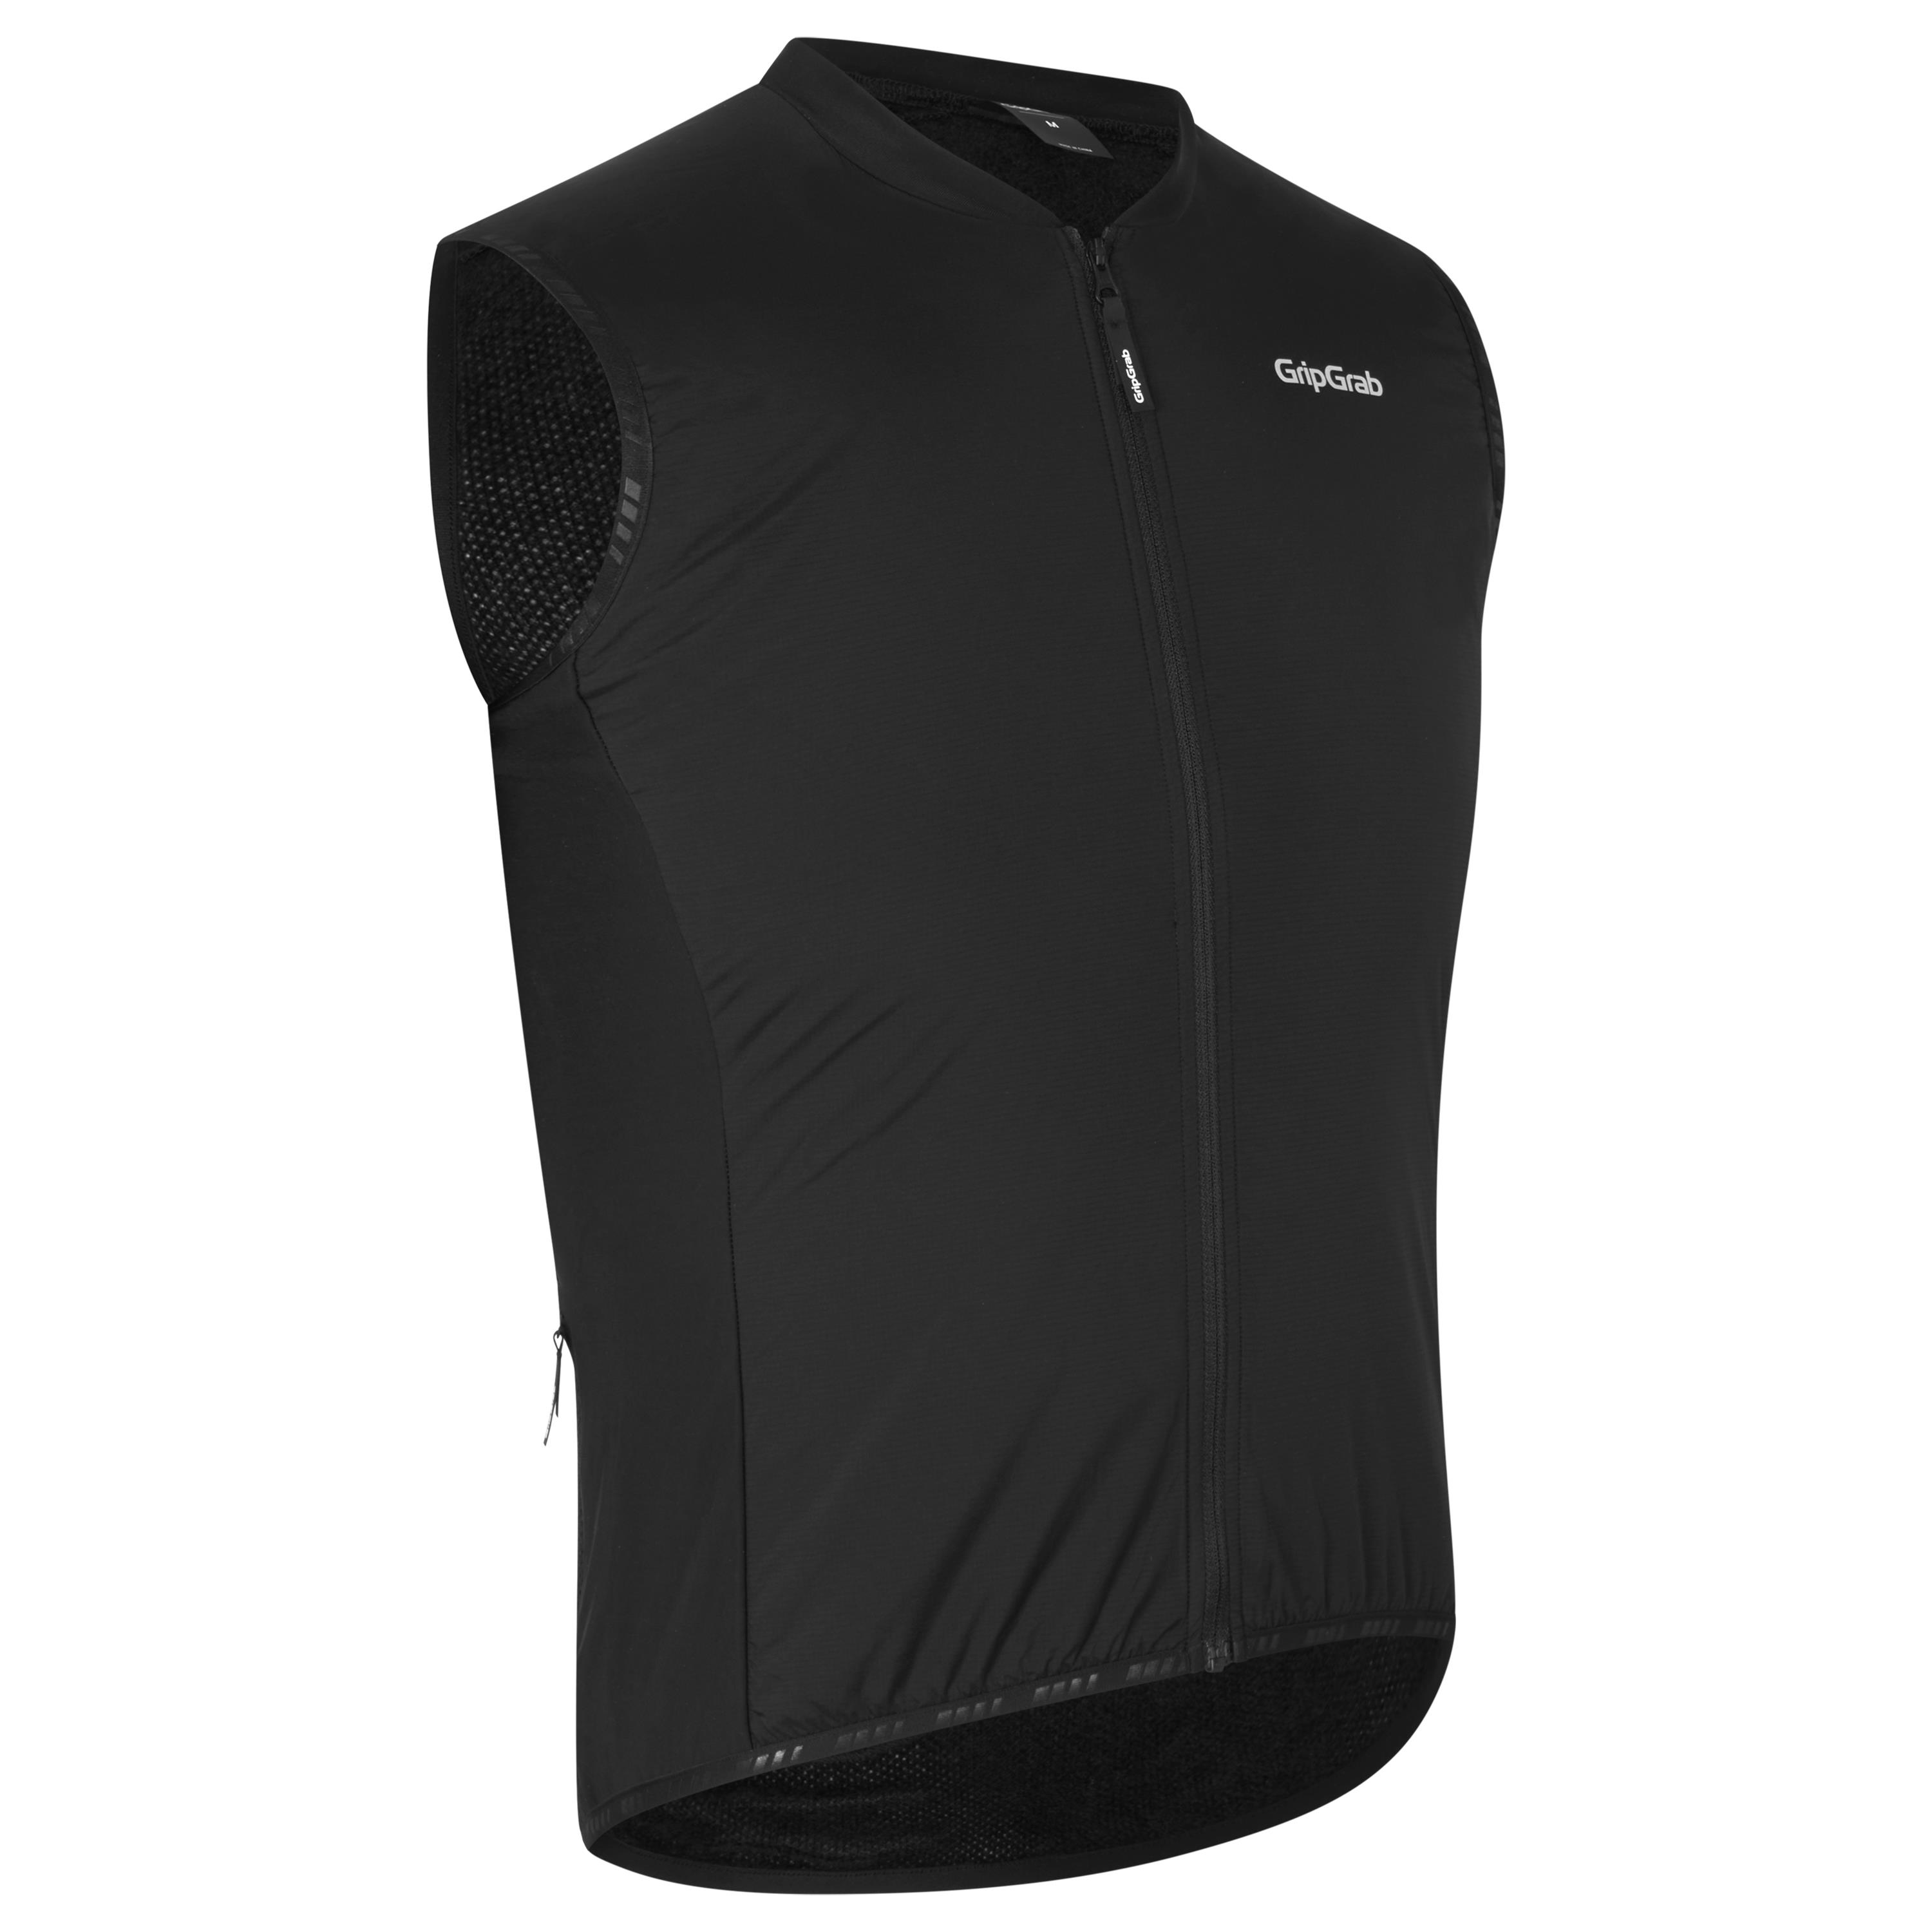 Gripgrab ThermaCore Bodywarmer